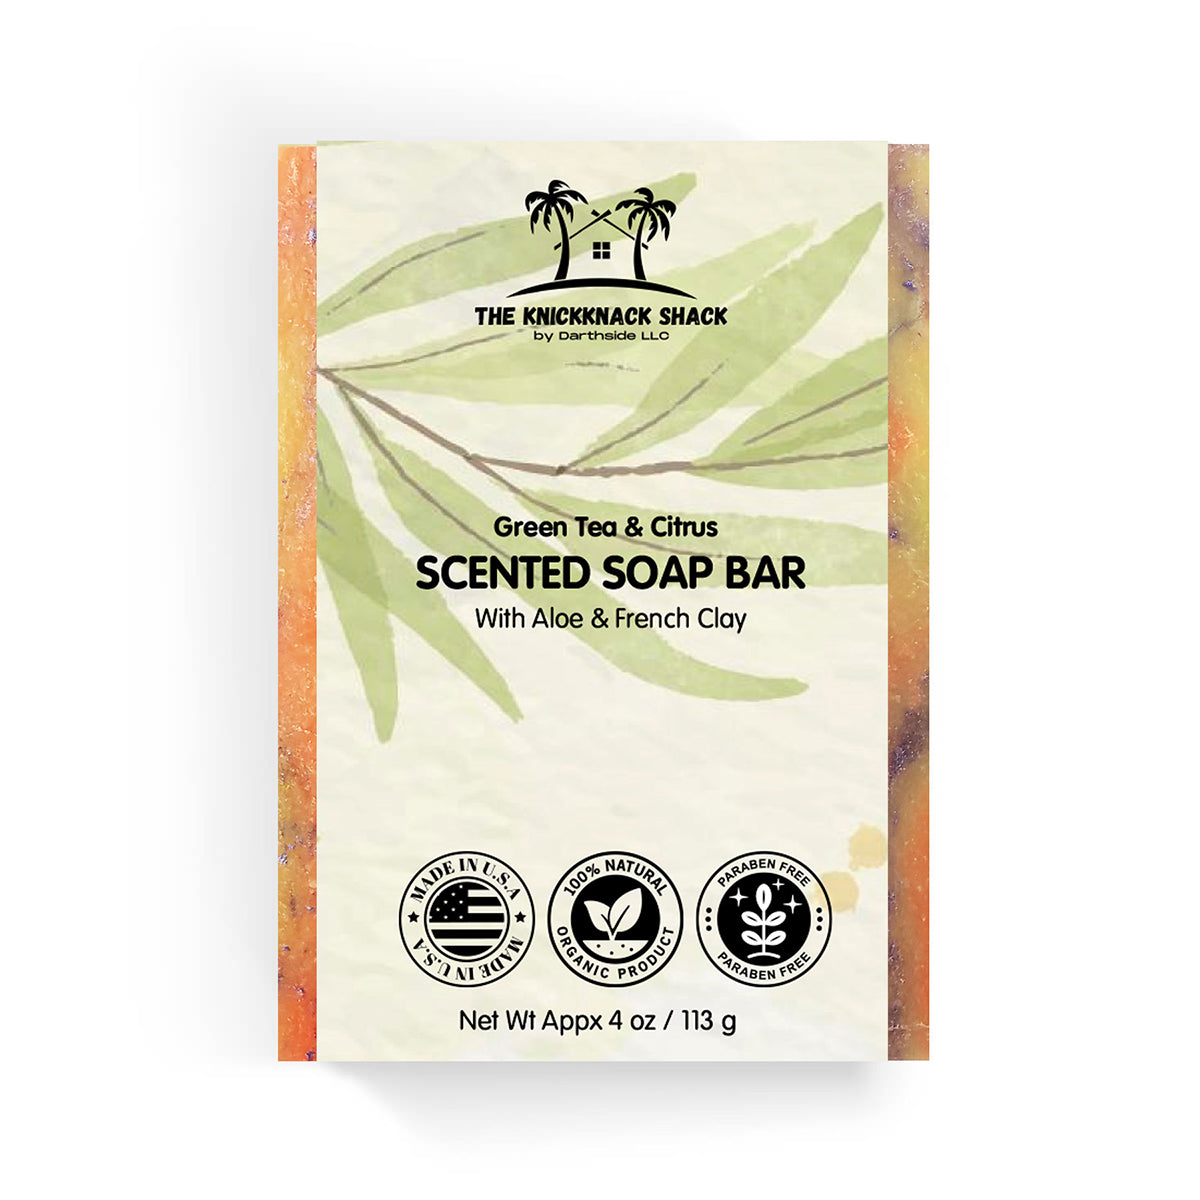 Green Tea & Citrus Scented Soap Bar with Aloe & French Clay